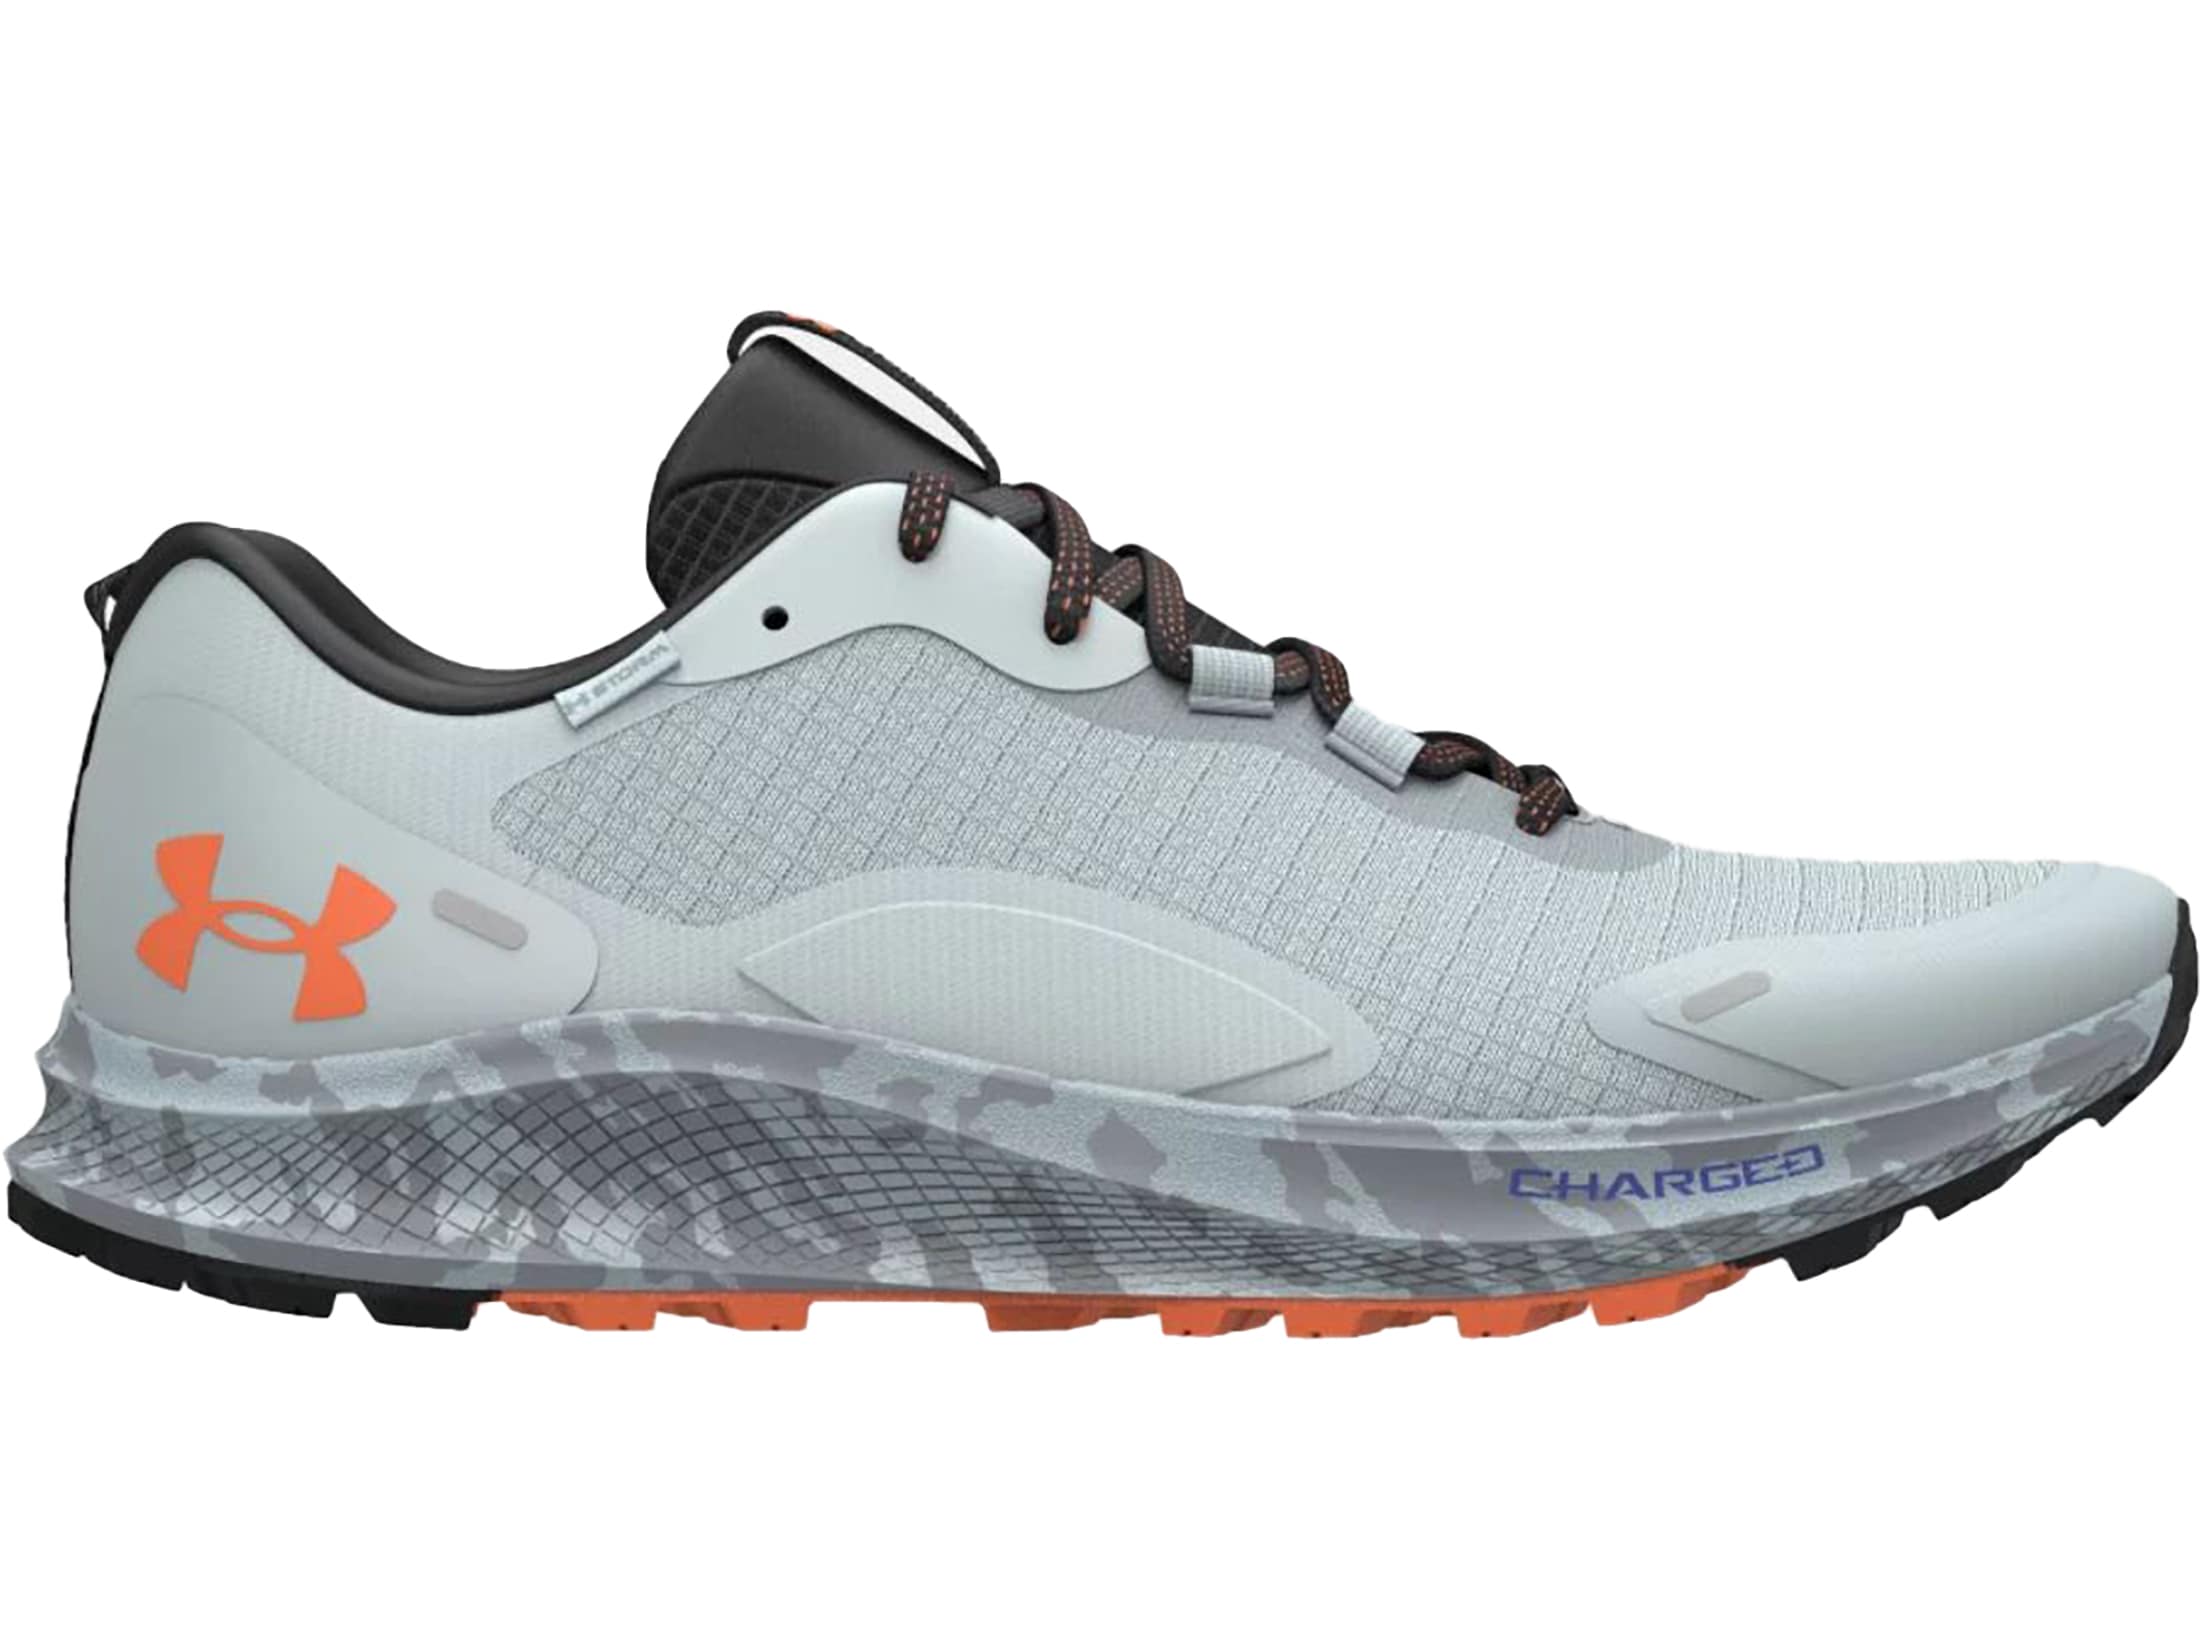 Under Armour Charged Bandit TR 2 SP Hiking Shoes Synthetic Mod